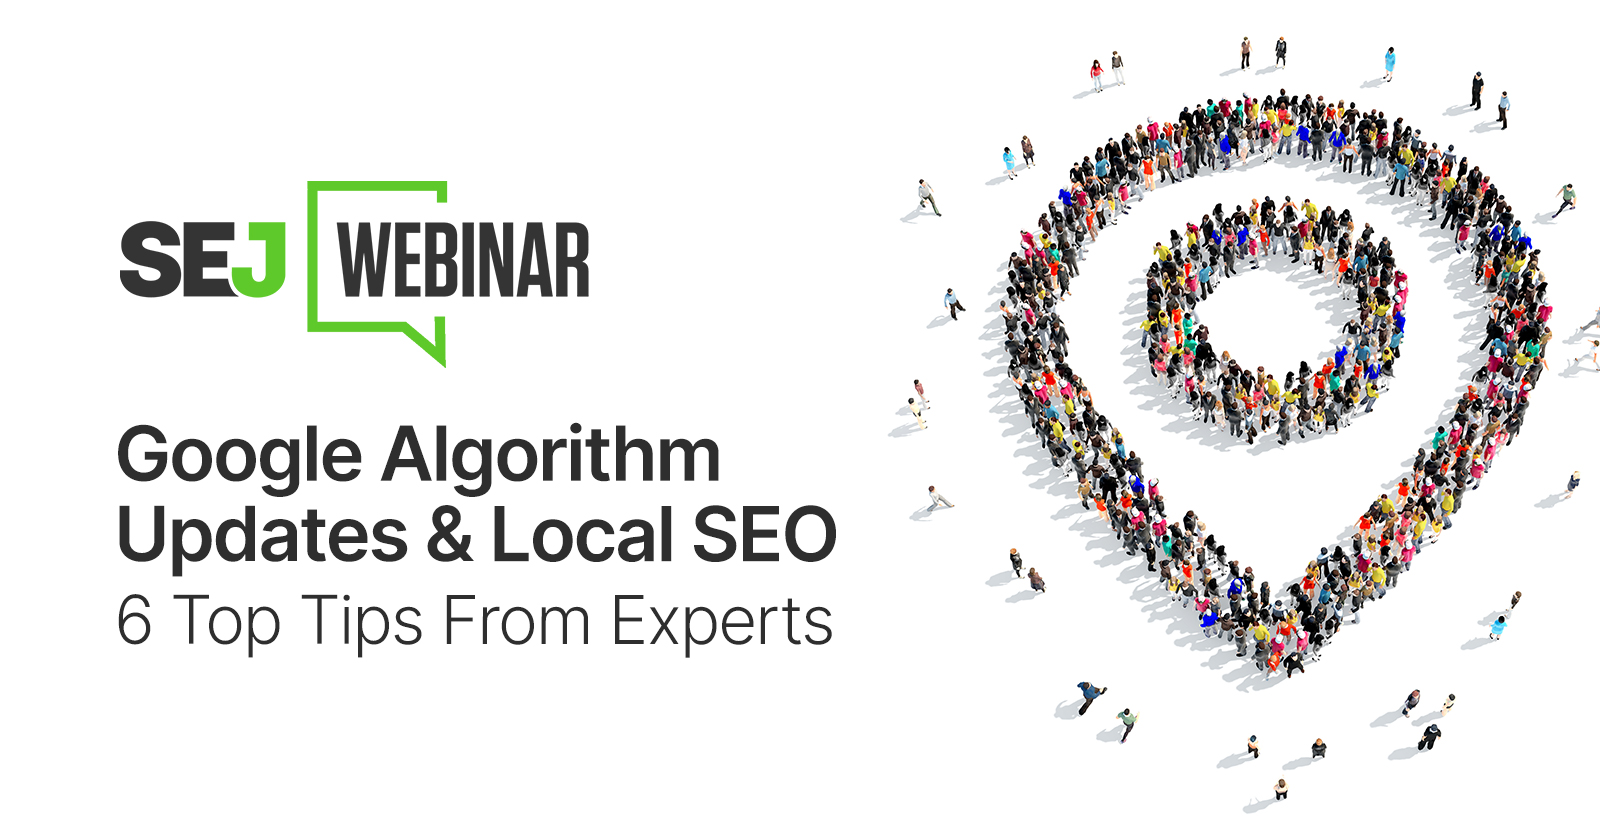 Google Algorithm Updates & Local SEO: 6 Top Tips From Experts